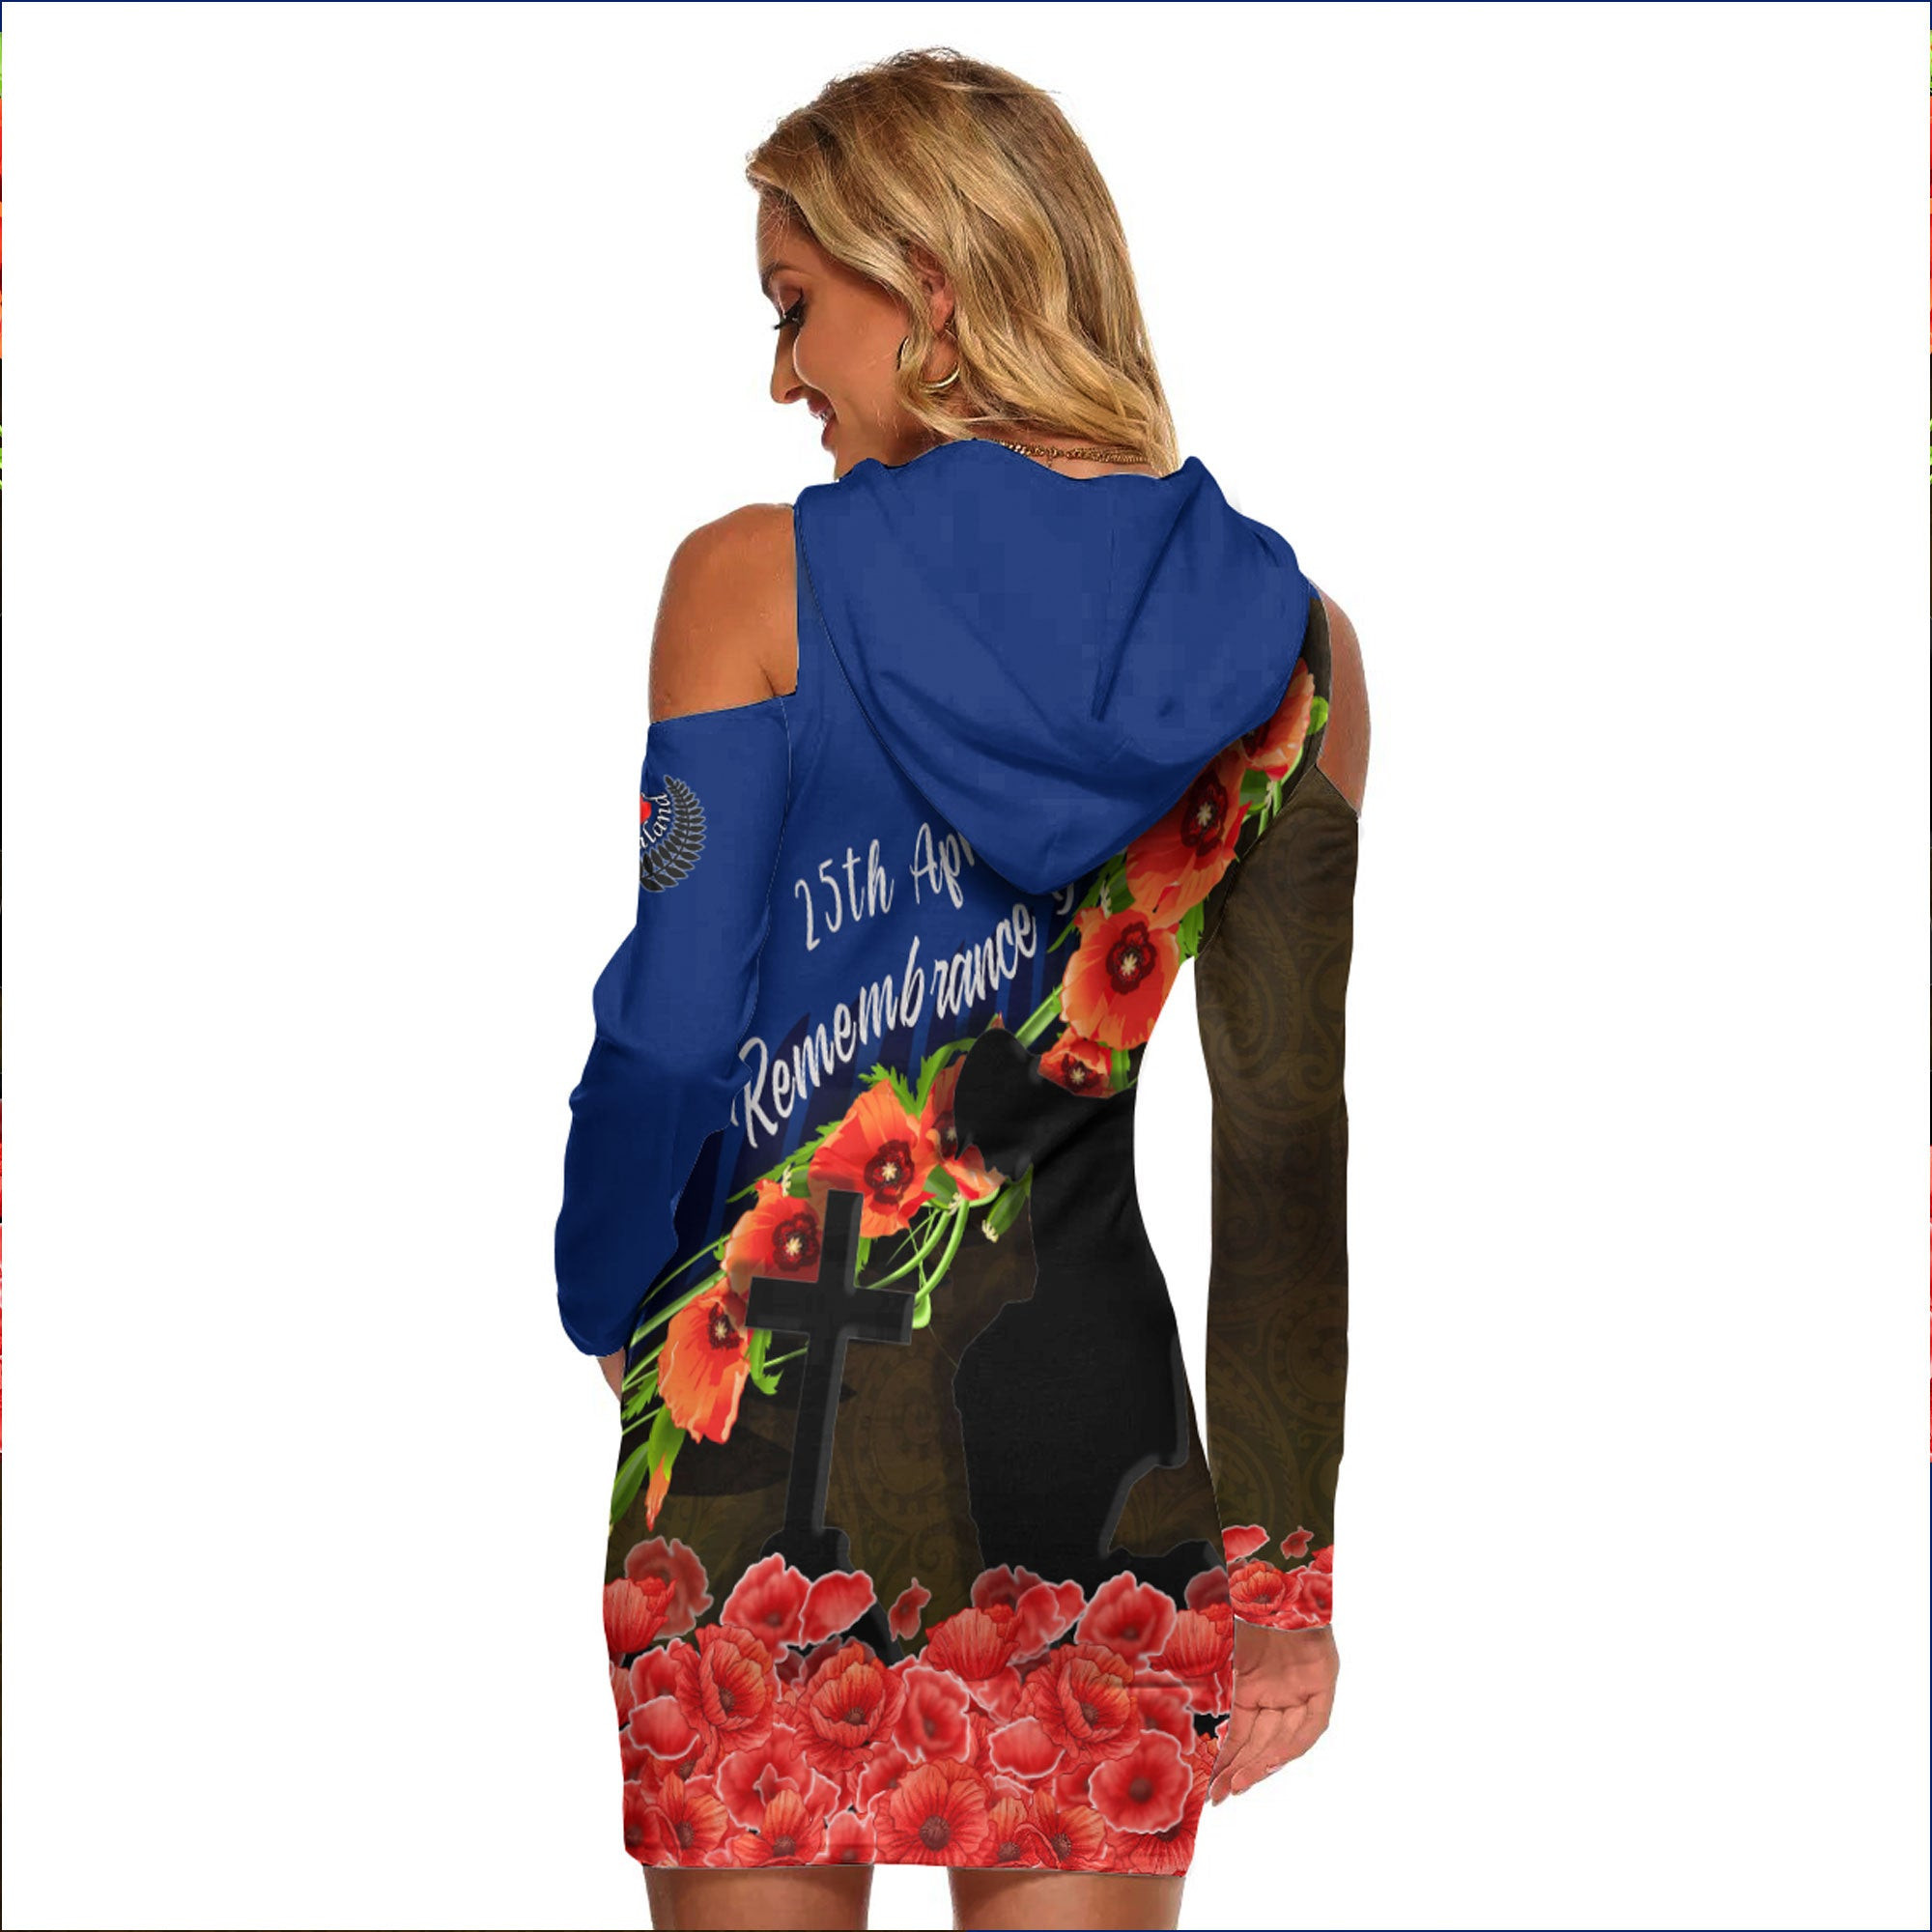 Love New Zealand Clothing - Anzac Day Poppy And Fern -  Women's Tight Dress A95 | Love New Zealand